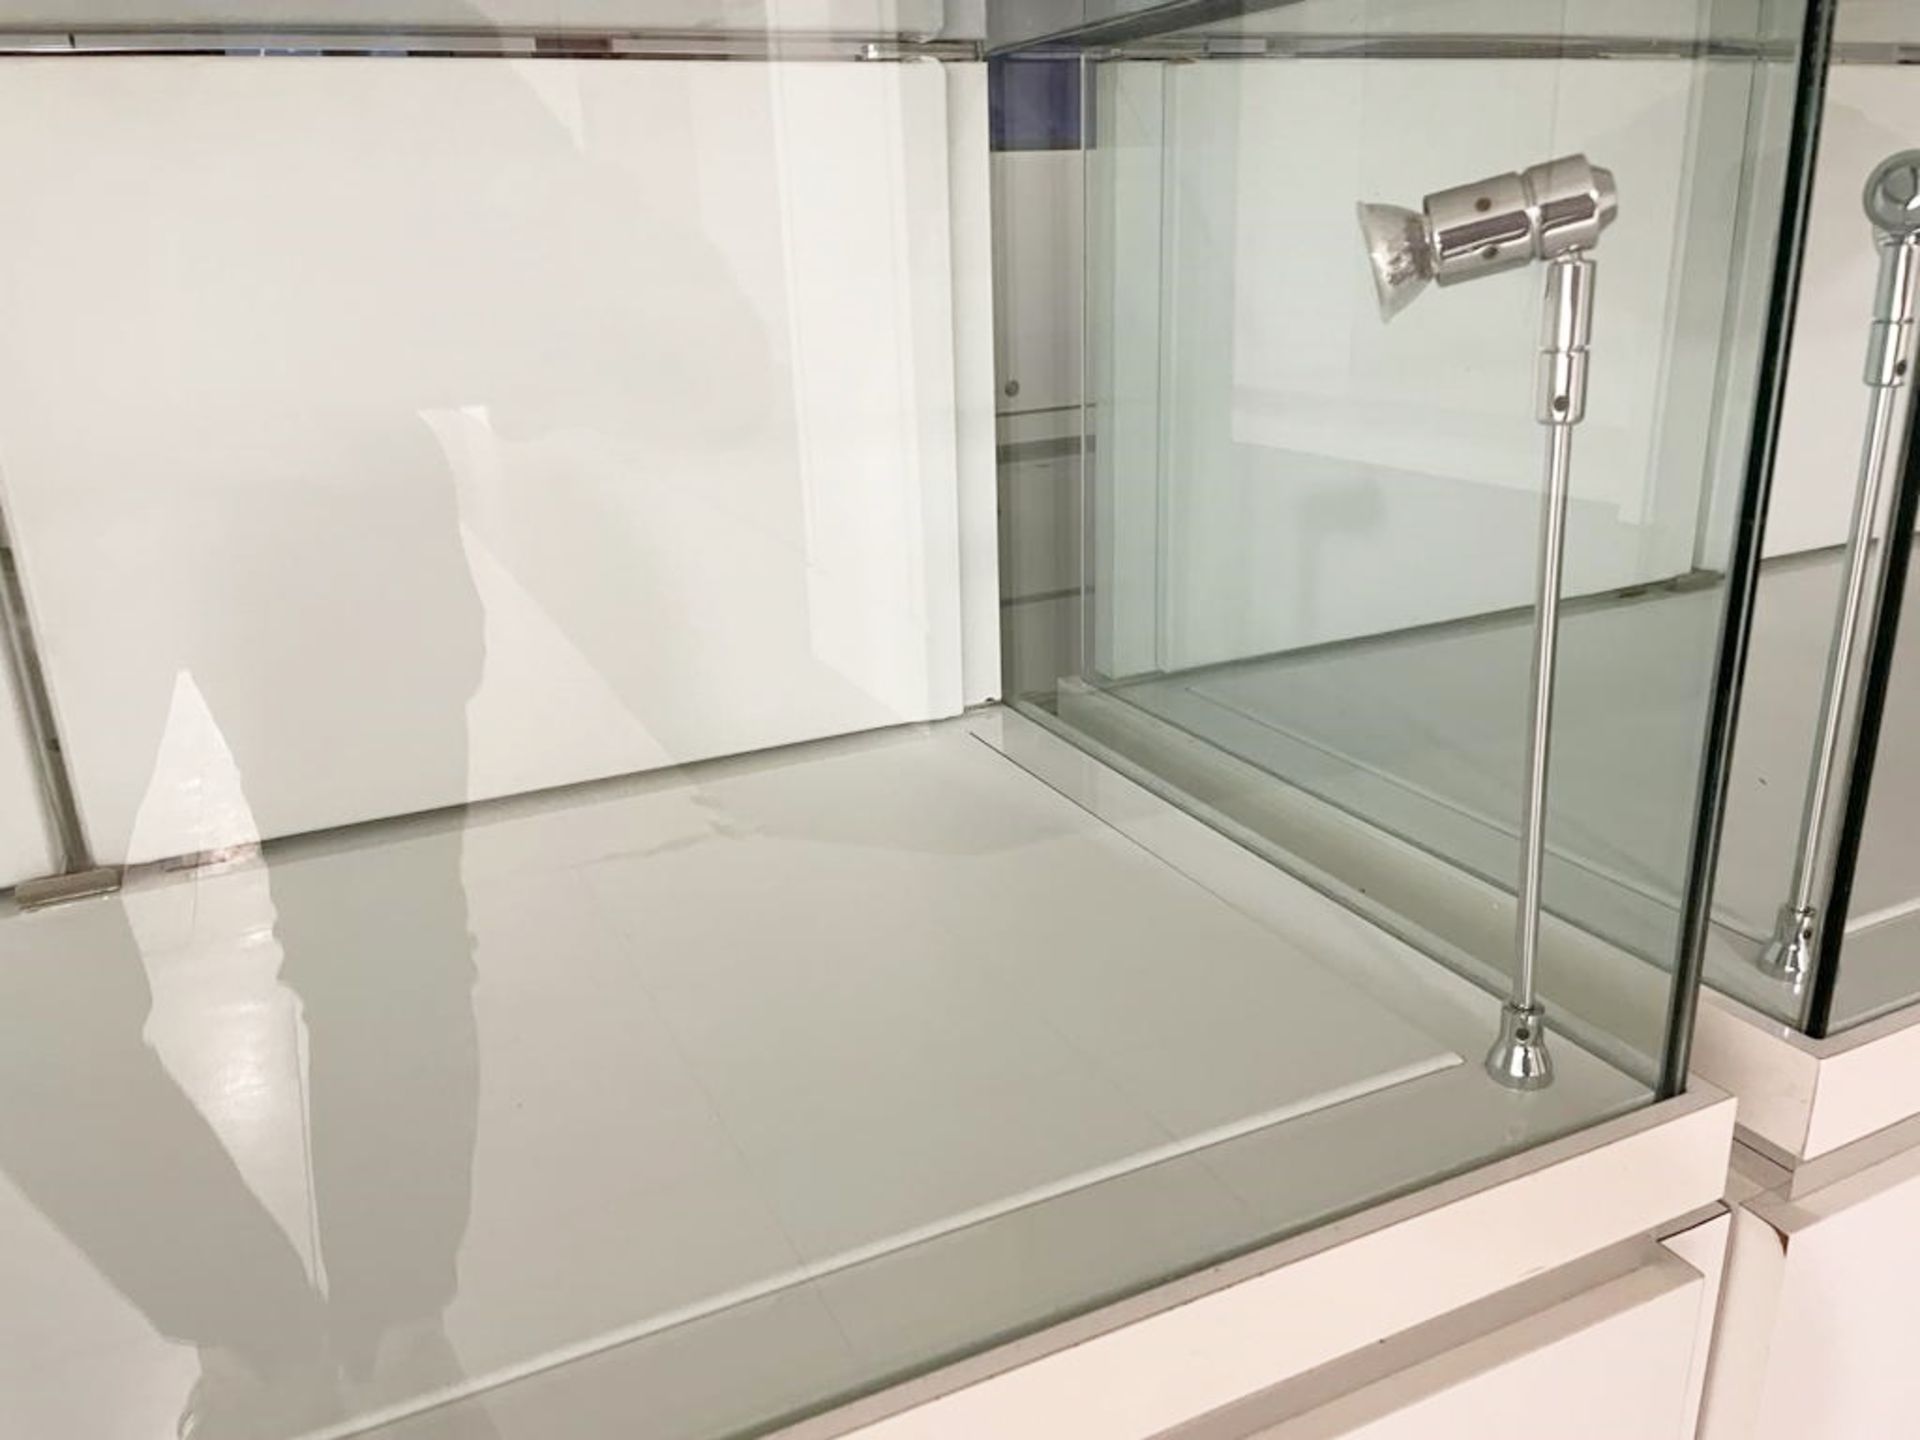 8 x Retail Glass Display Case Counter Cabinets - Features White Gloss Finish, Safety Glass, Internal - Image 9 of 13